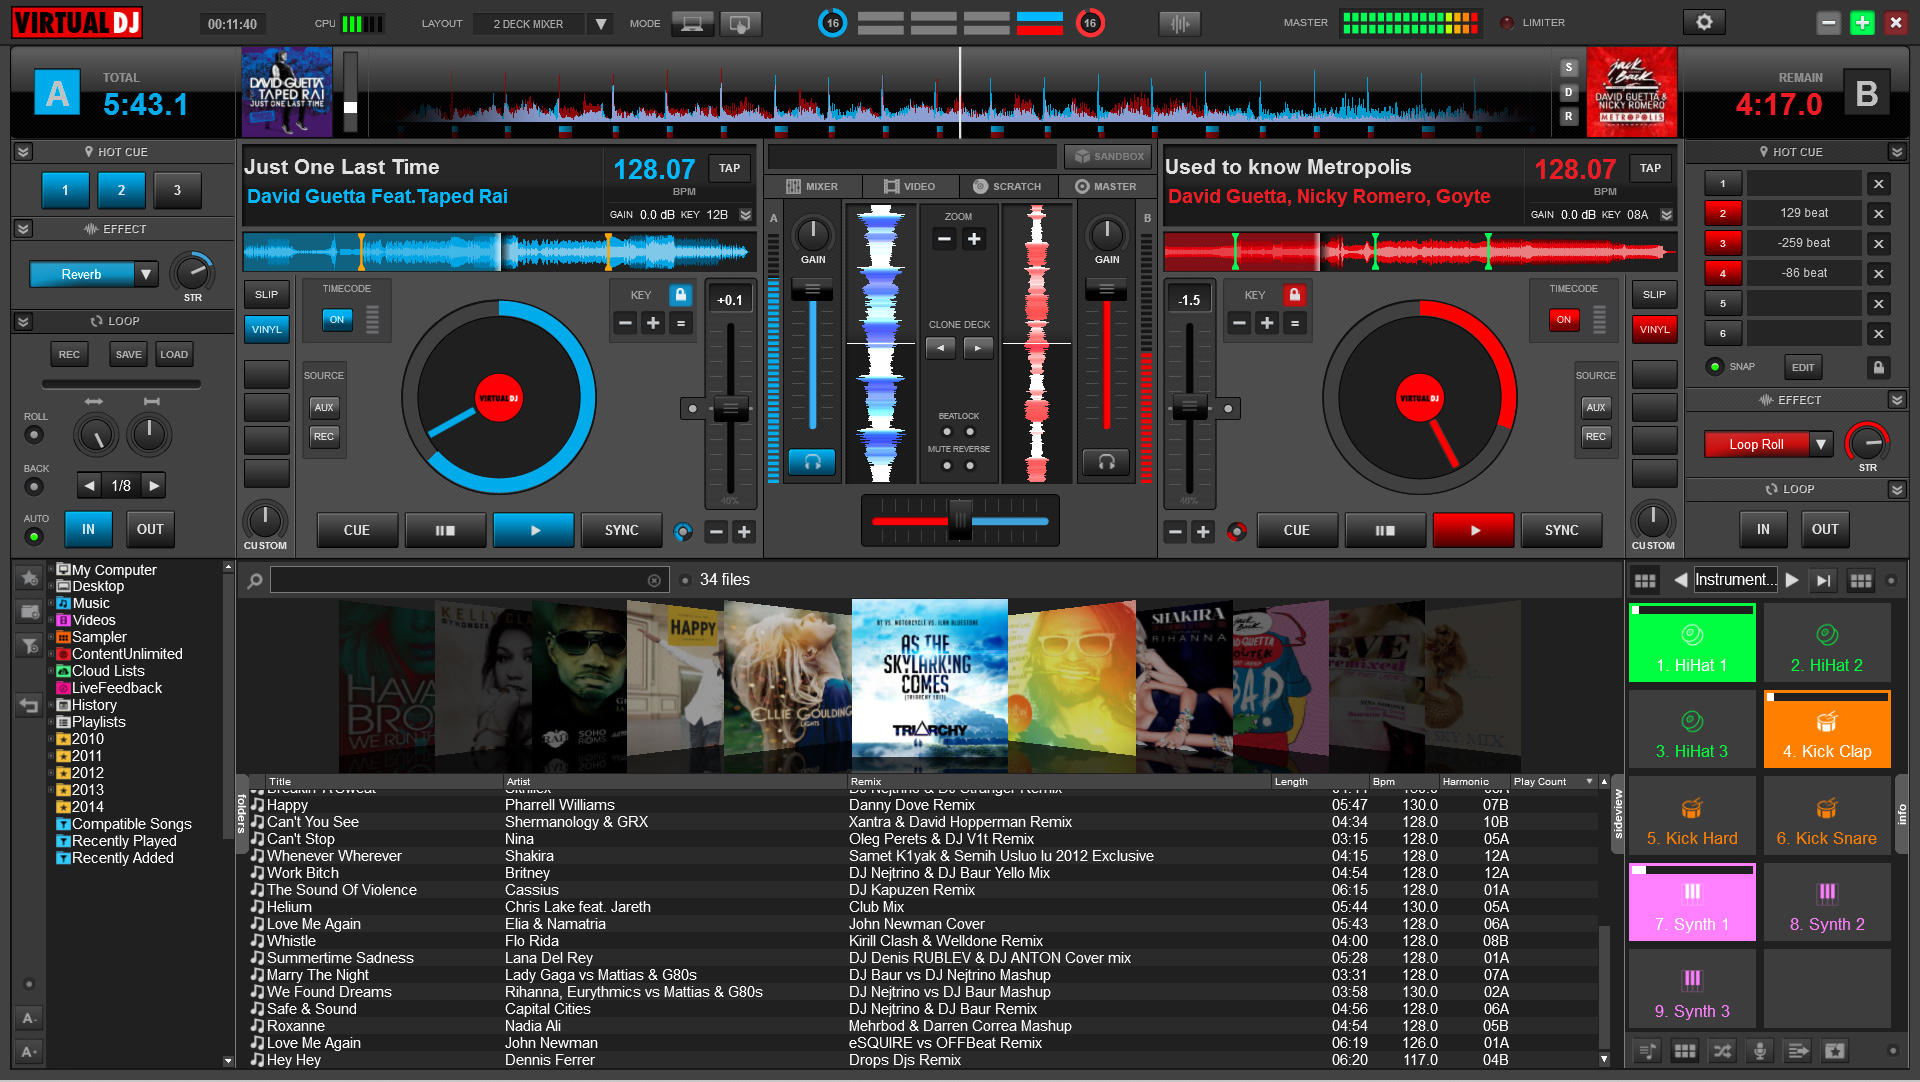 How to download effects for virtual dj 8 free online